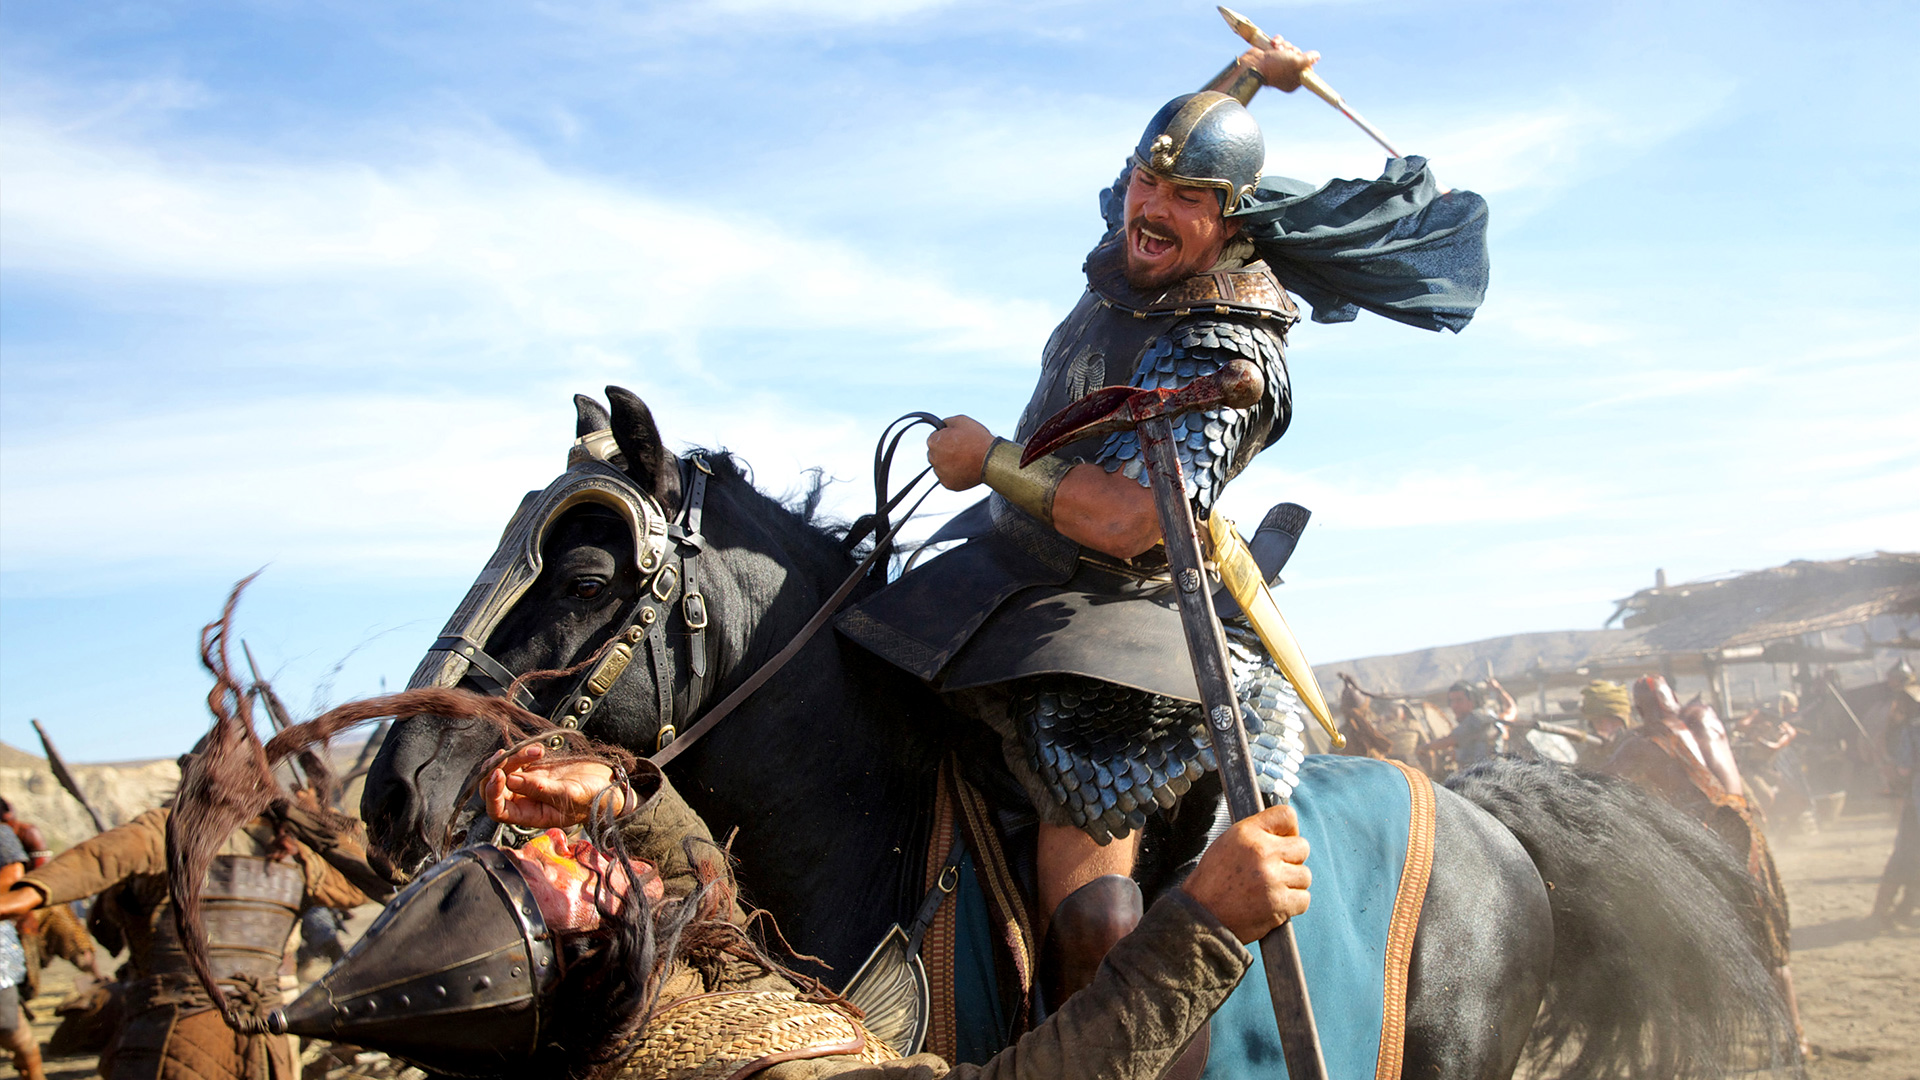 Exodus: Gods And Kings Backgrounds, Compatible - PC, Mobile, Gadgets| 1920x1080 px